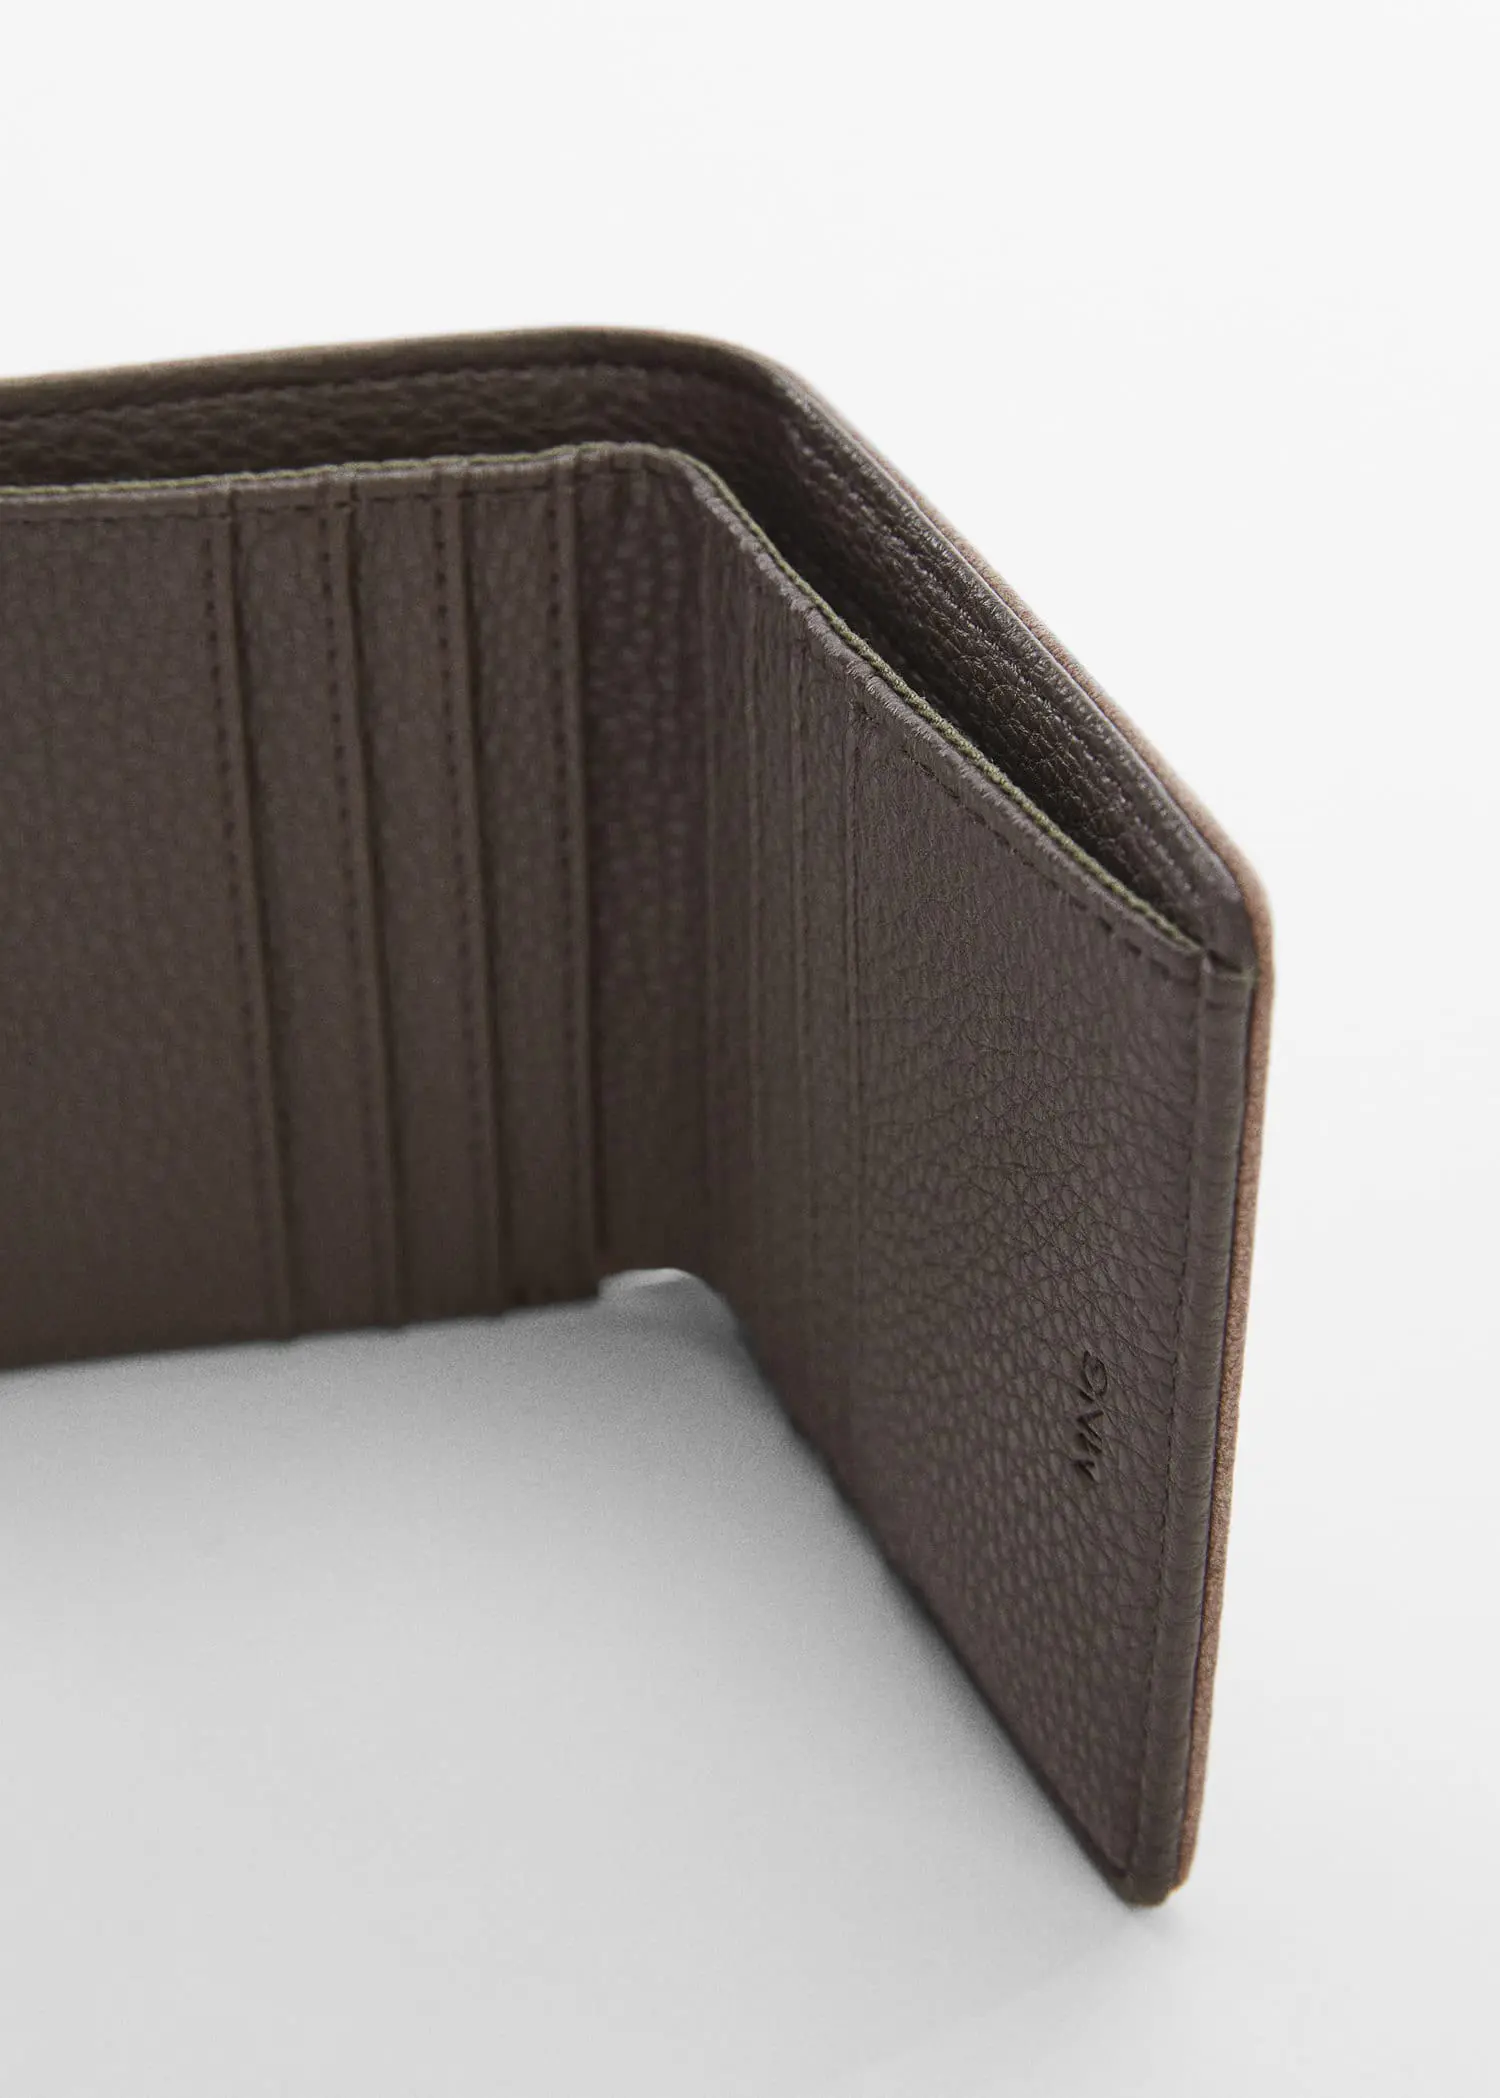 Mango Anti-contactless wallet. a close-up view of the inside of a wallet. 